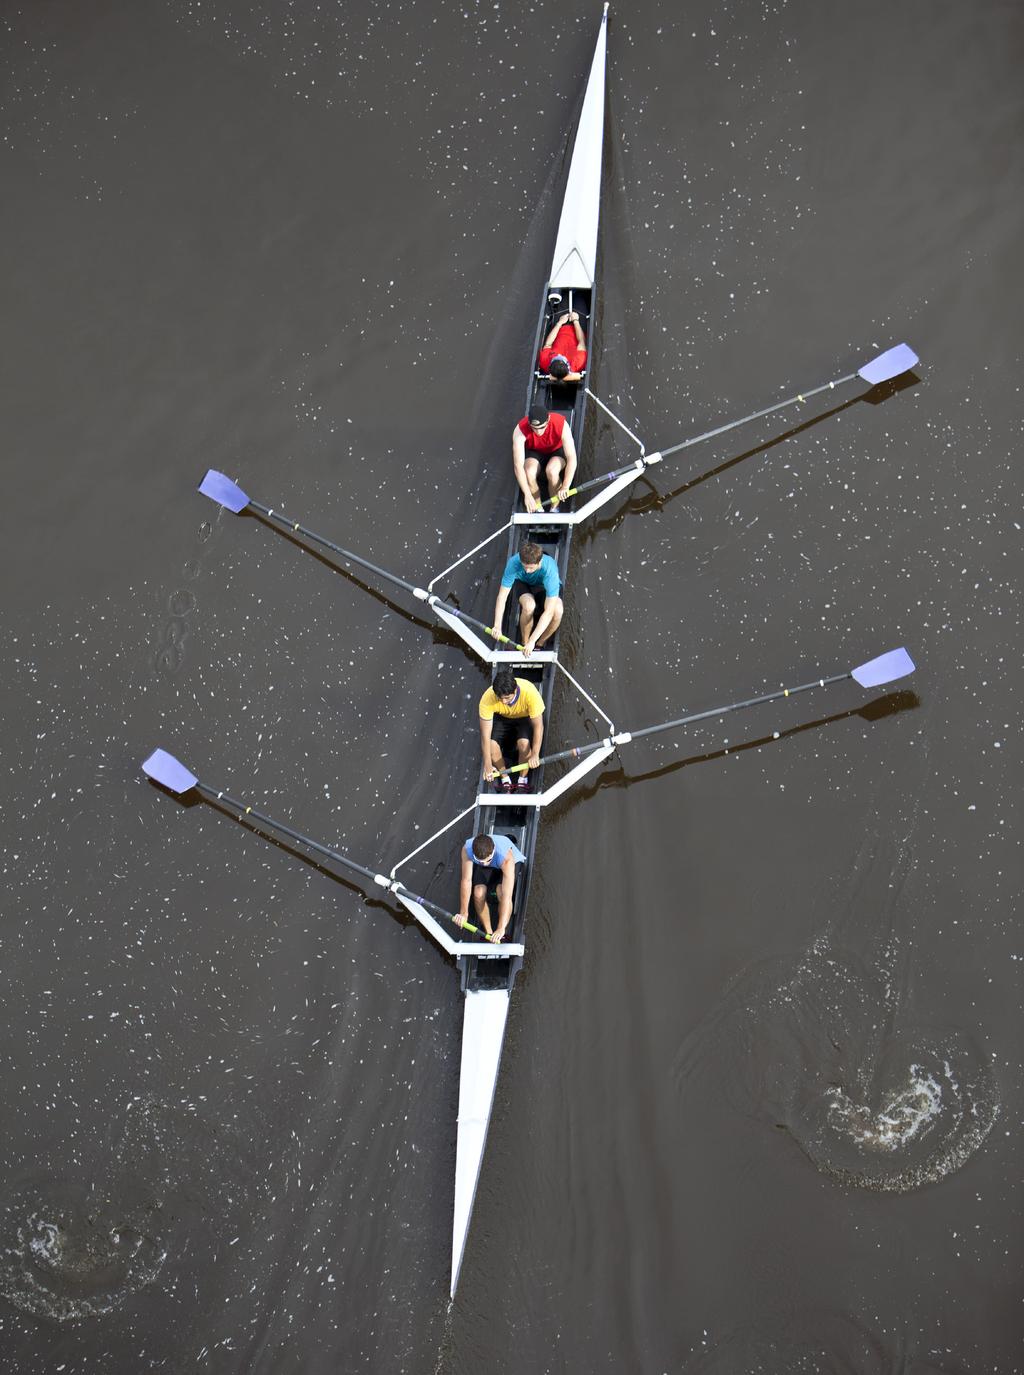 3 Imagine Your Sales Team on a Boat A sales team is like a crew team each member pulls their own weight while also moving the entire boat forward.